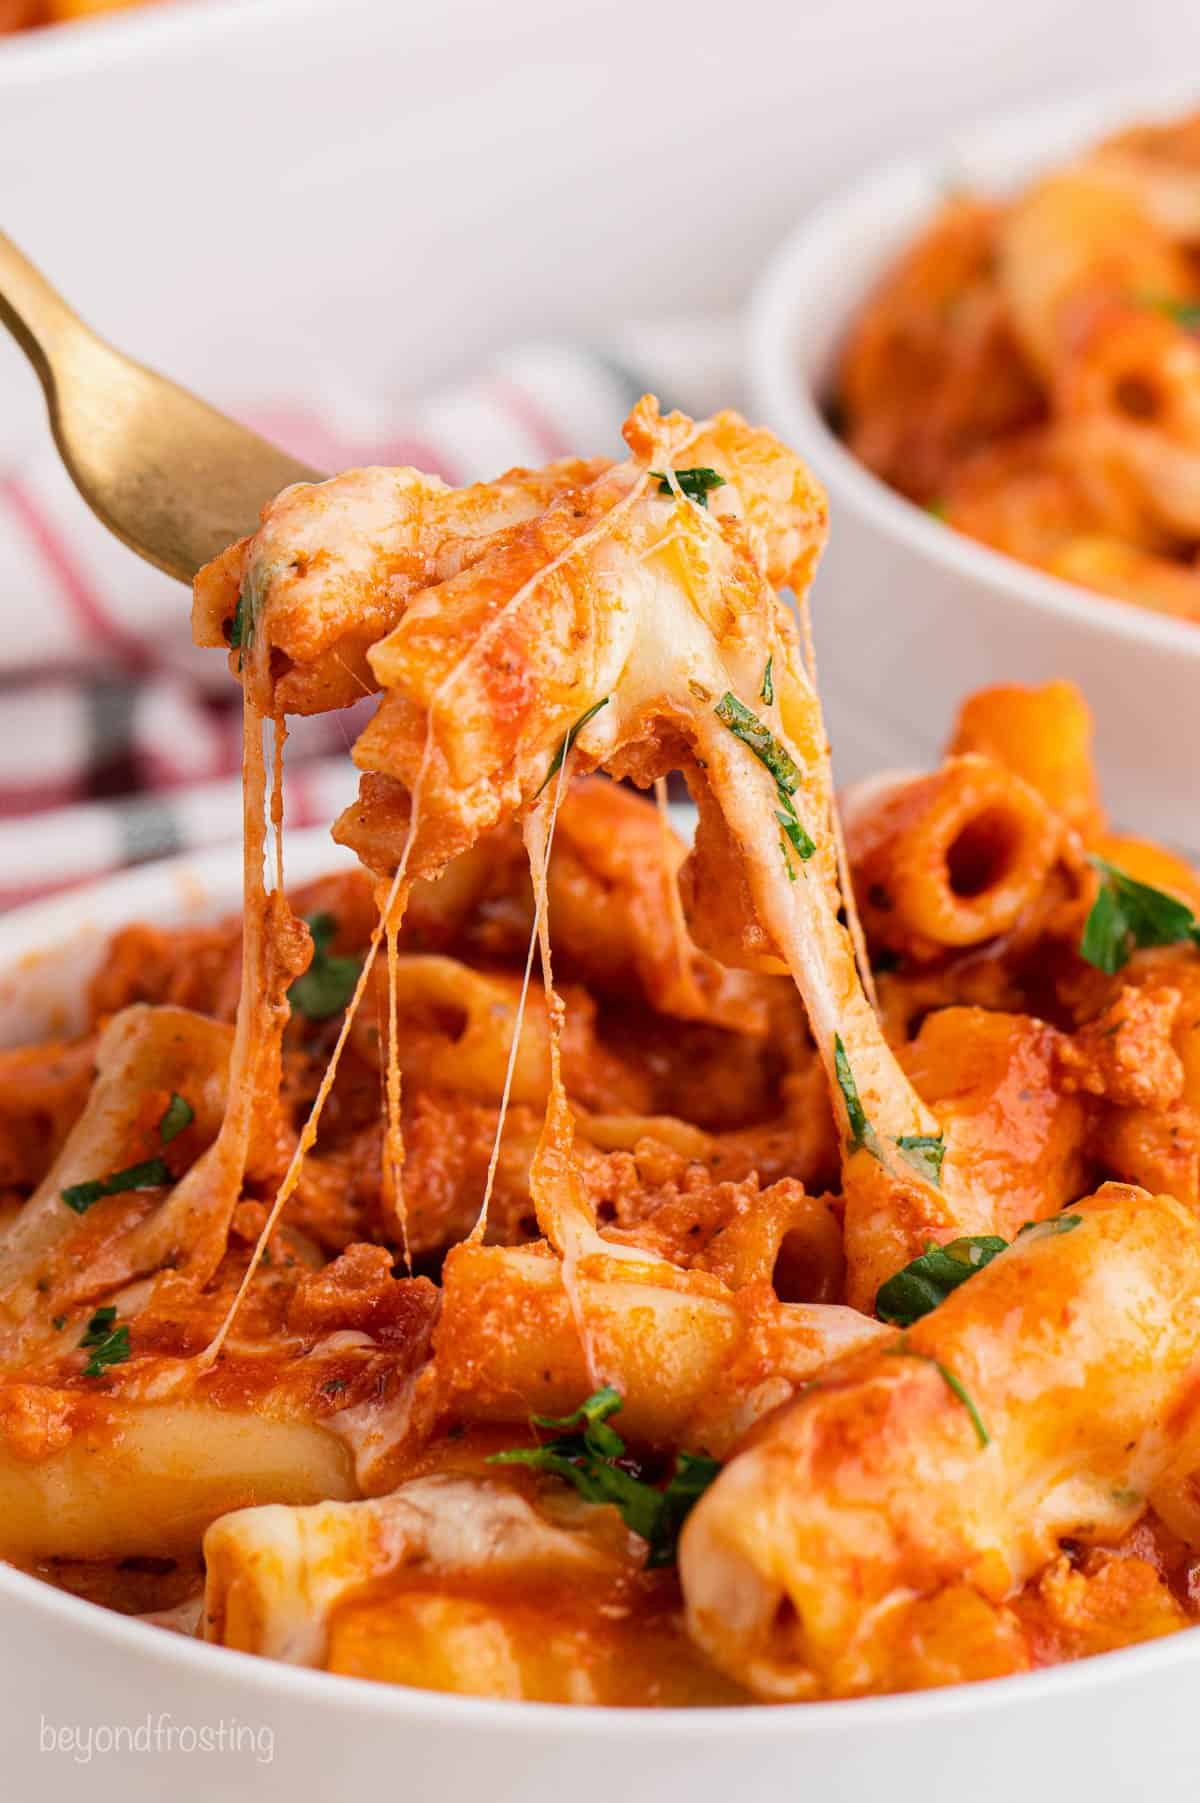 A forkful of baked ziti over a bowl